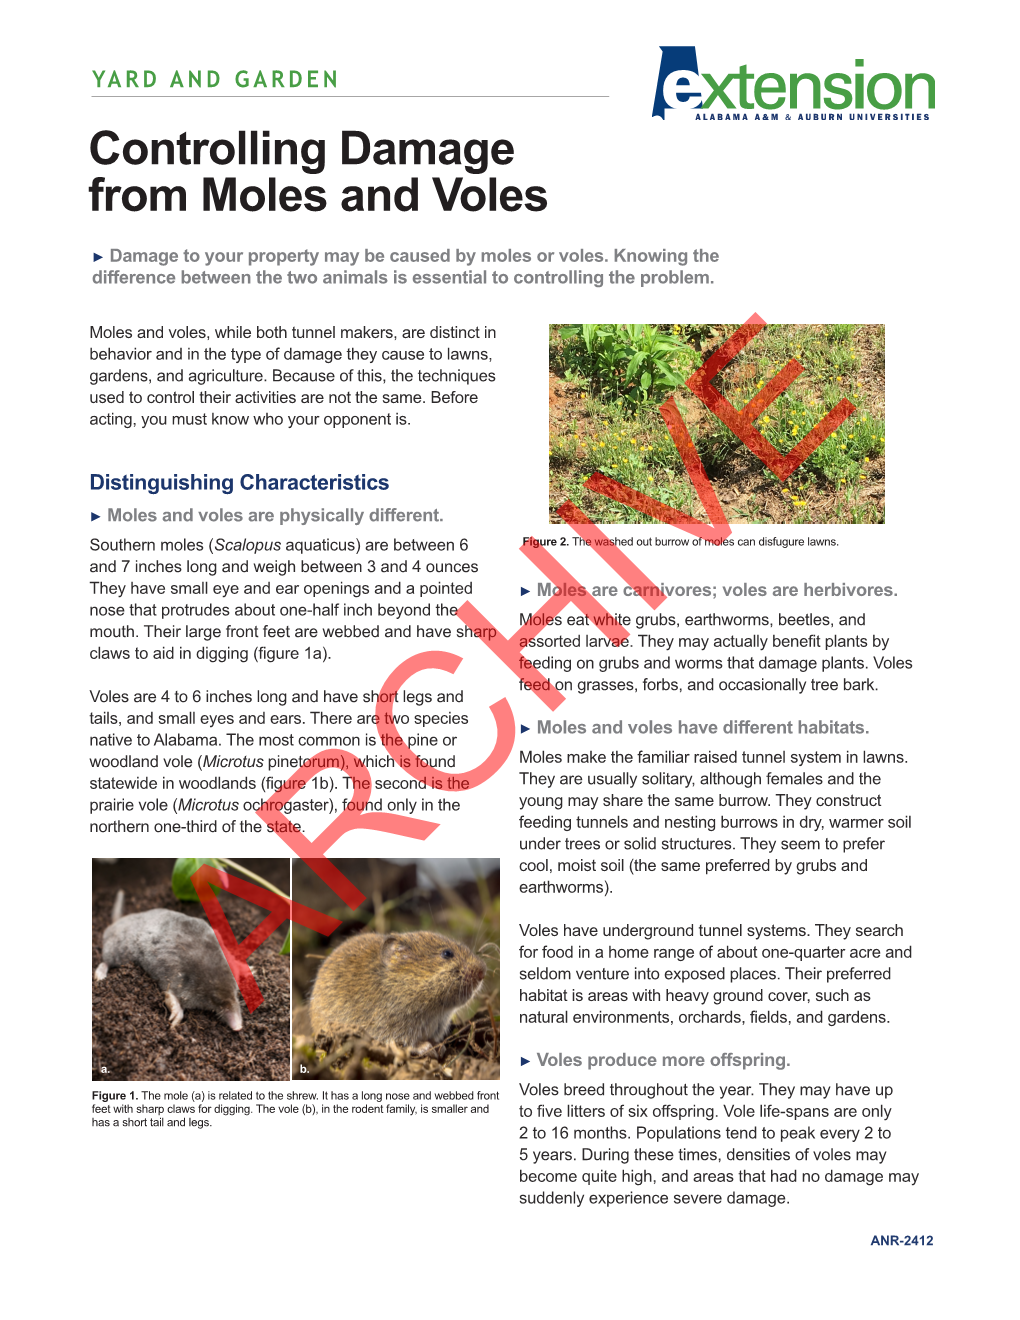 Controlling Damage from Moles and Voles